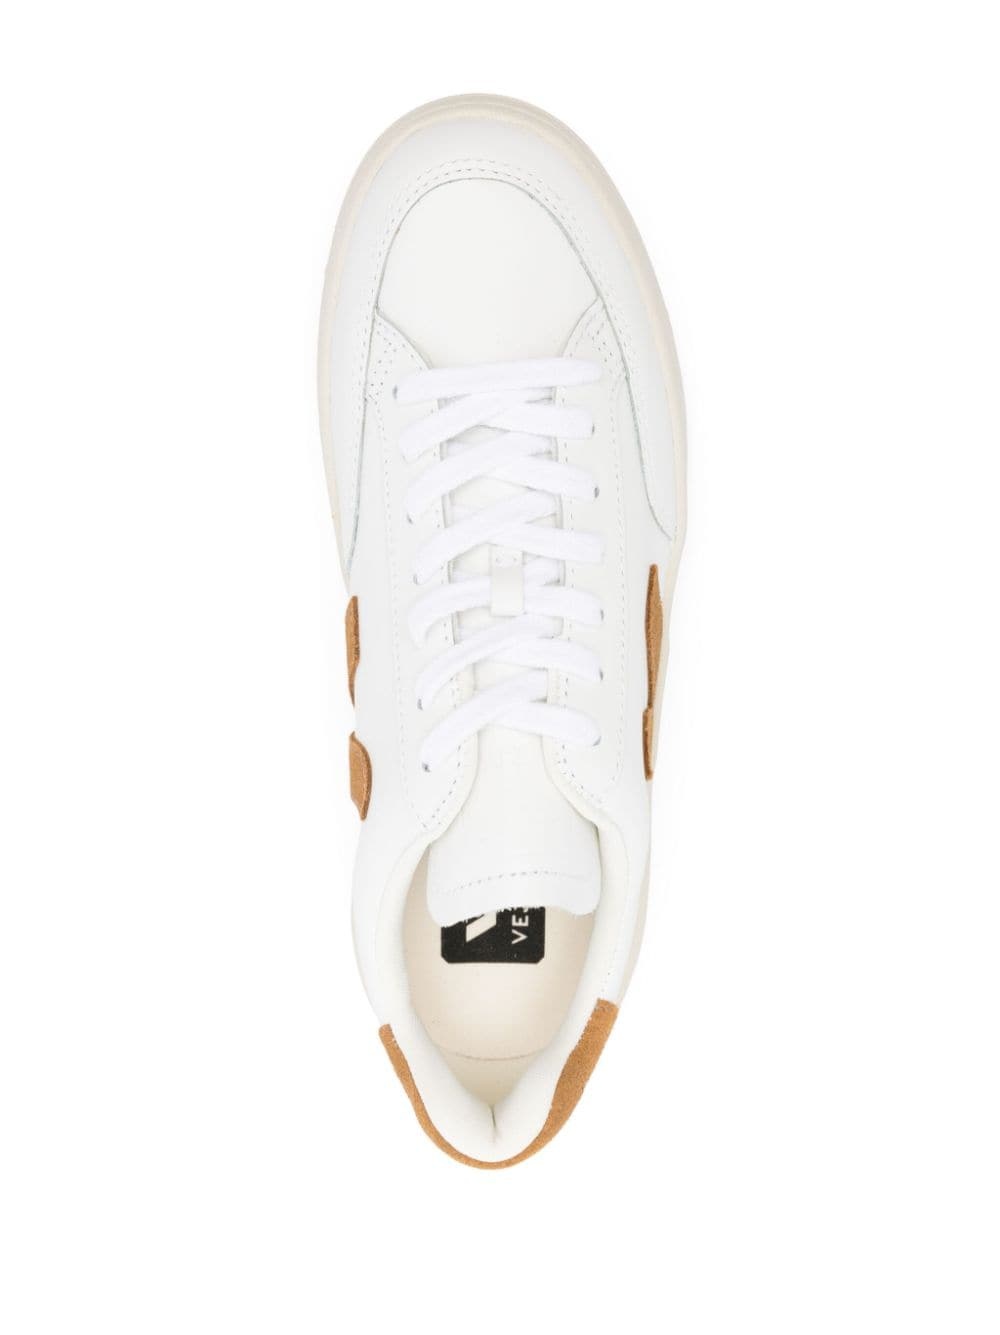 V-12 leather sneakers - 4